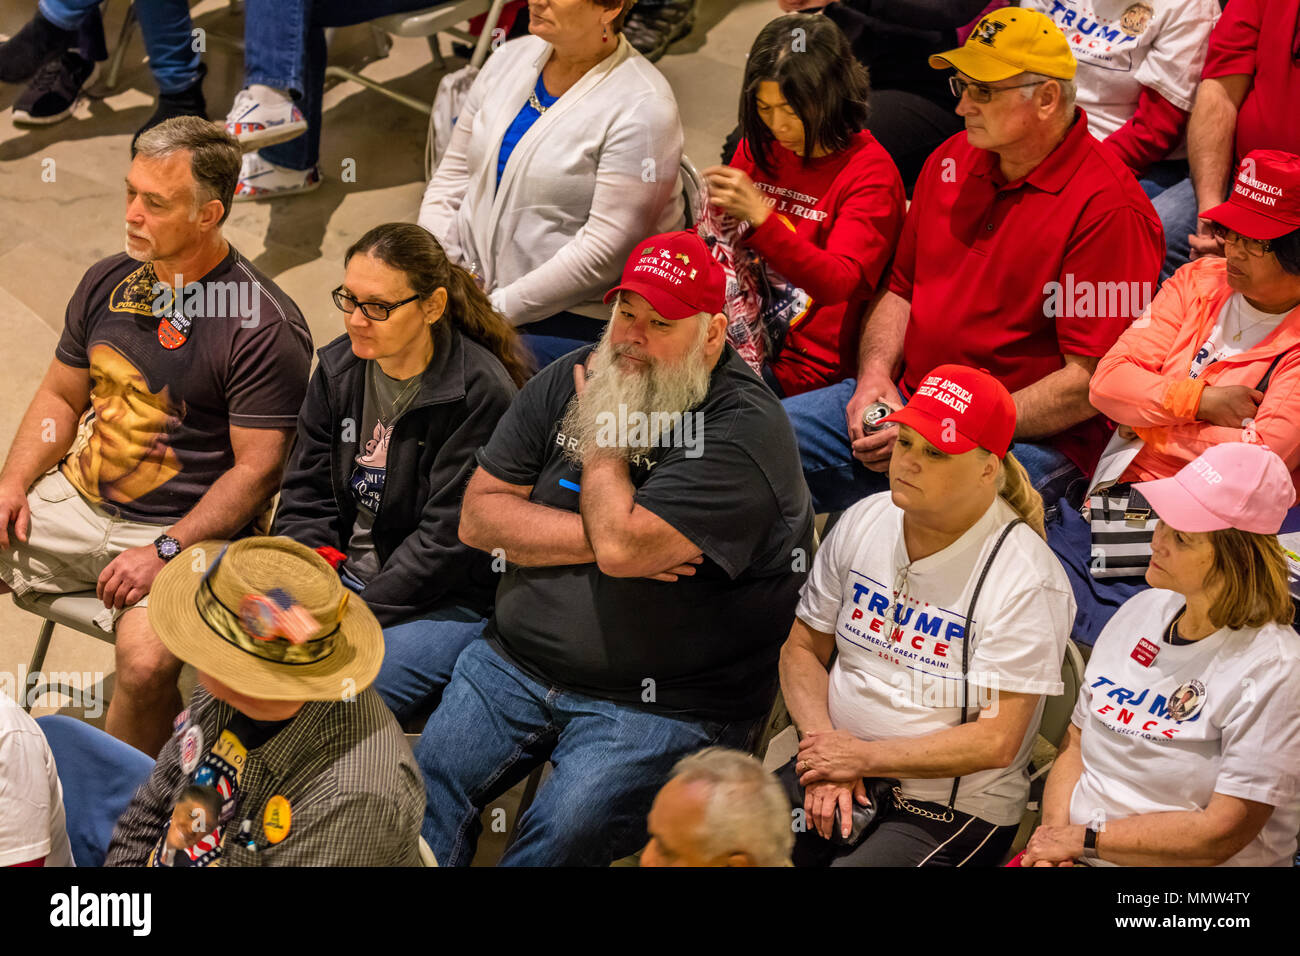 MARCH 4, 2017 - JEFFERSON CITY - President Trump Supporters Hold Rally, Jefferson City, State Capitol of Missouri Stock Photo